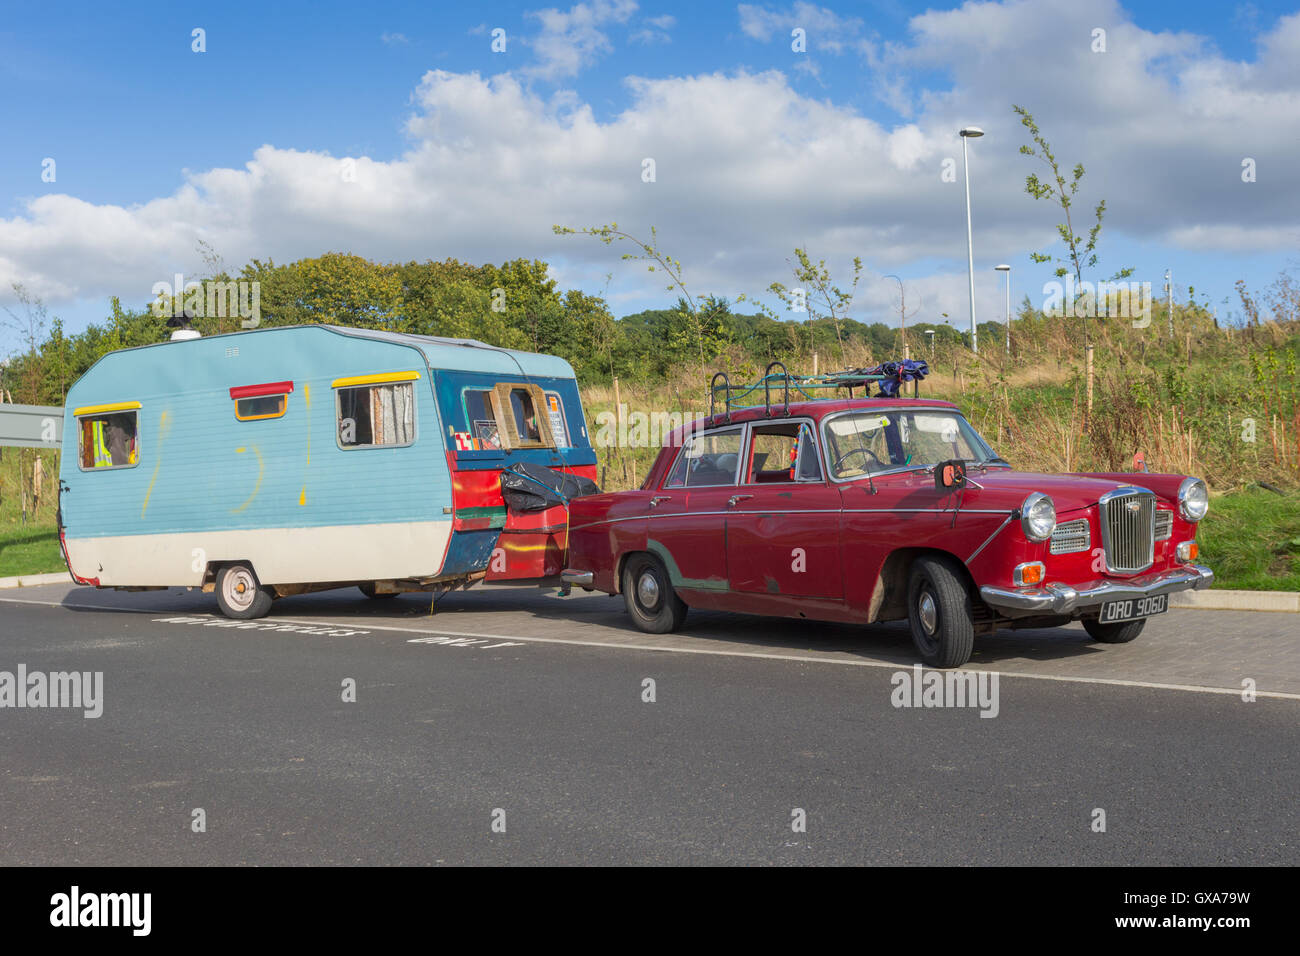 Tradition caravan trailer from the 1960s being towed by an old car from the same period, parked at a motorway services Stock Photo